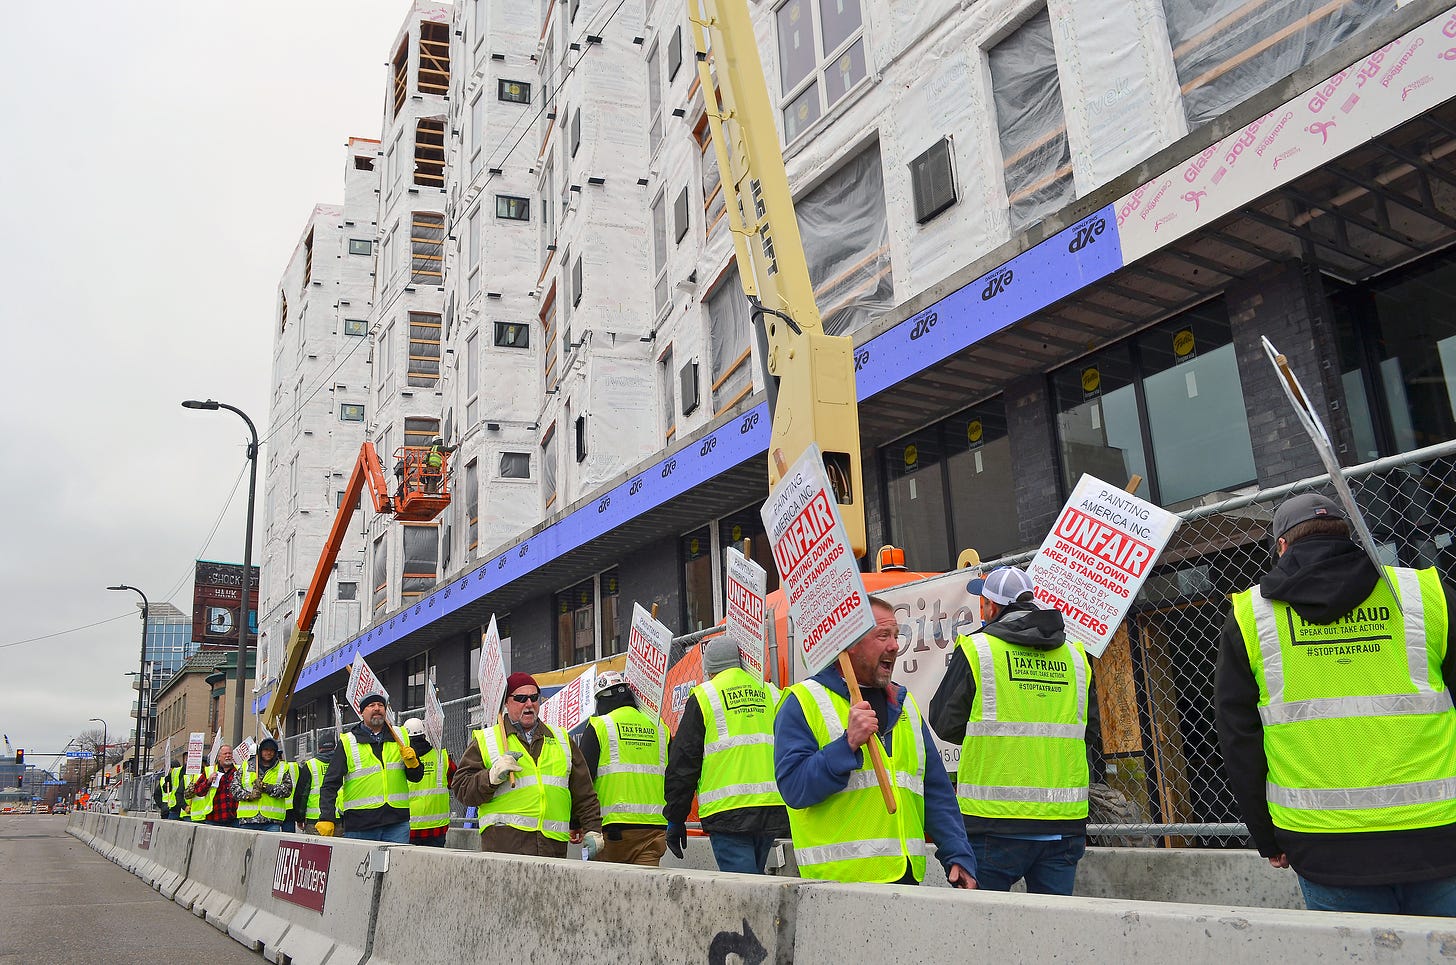 workers wearing neon yellow vests carry picket signs reading "unfair" in front of a building under construction